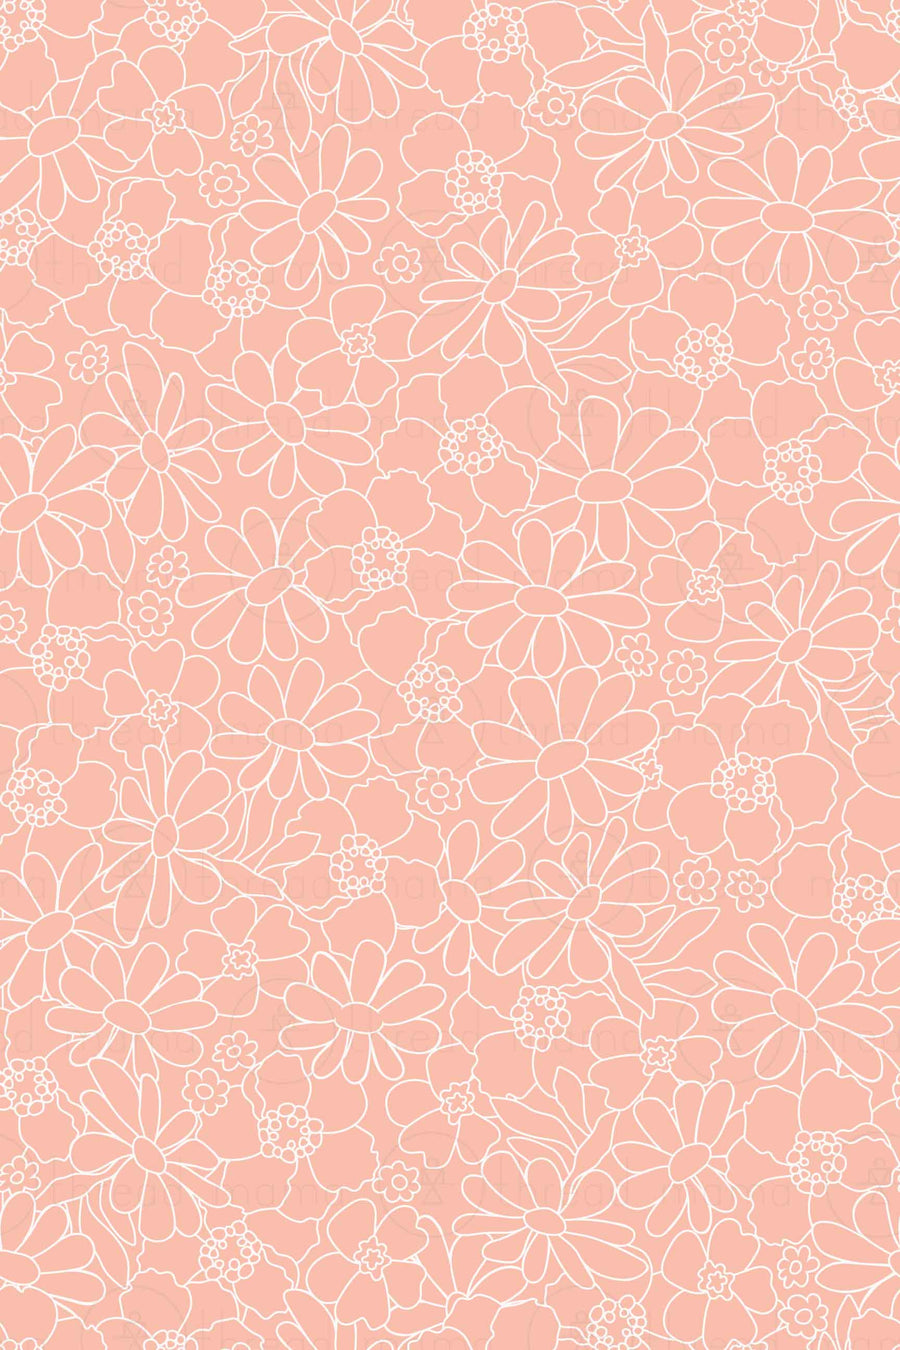 Repeating Pattern #42 (Seamless)